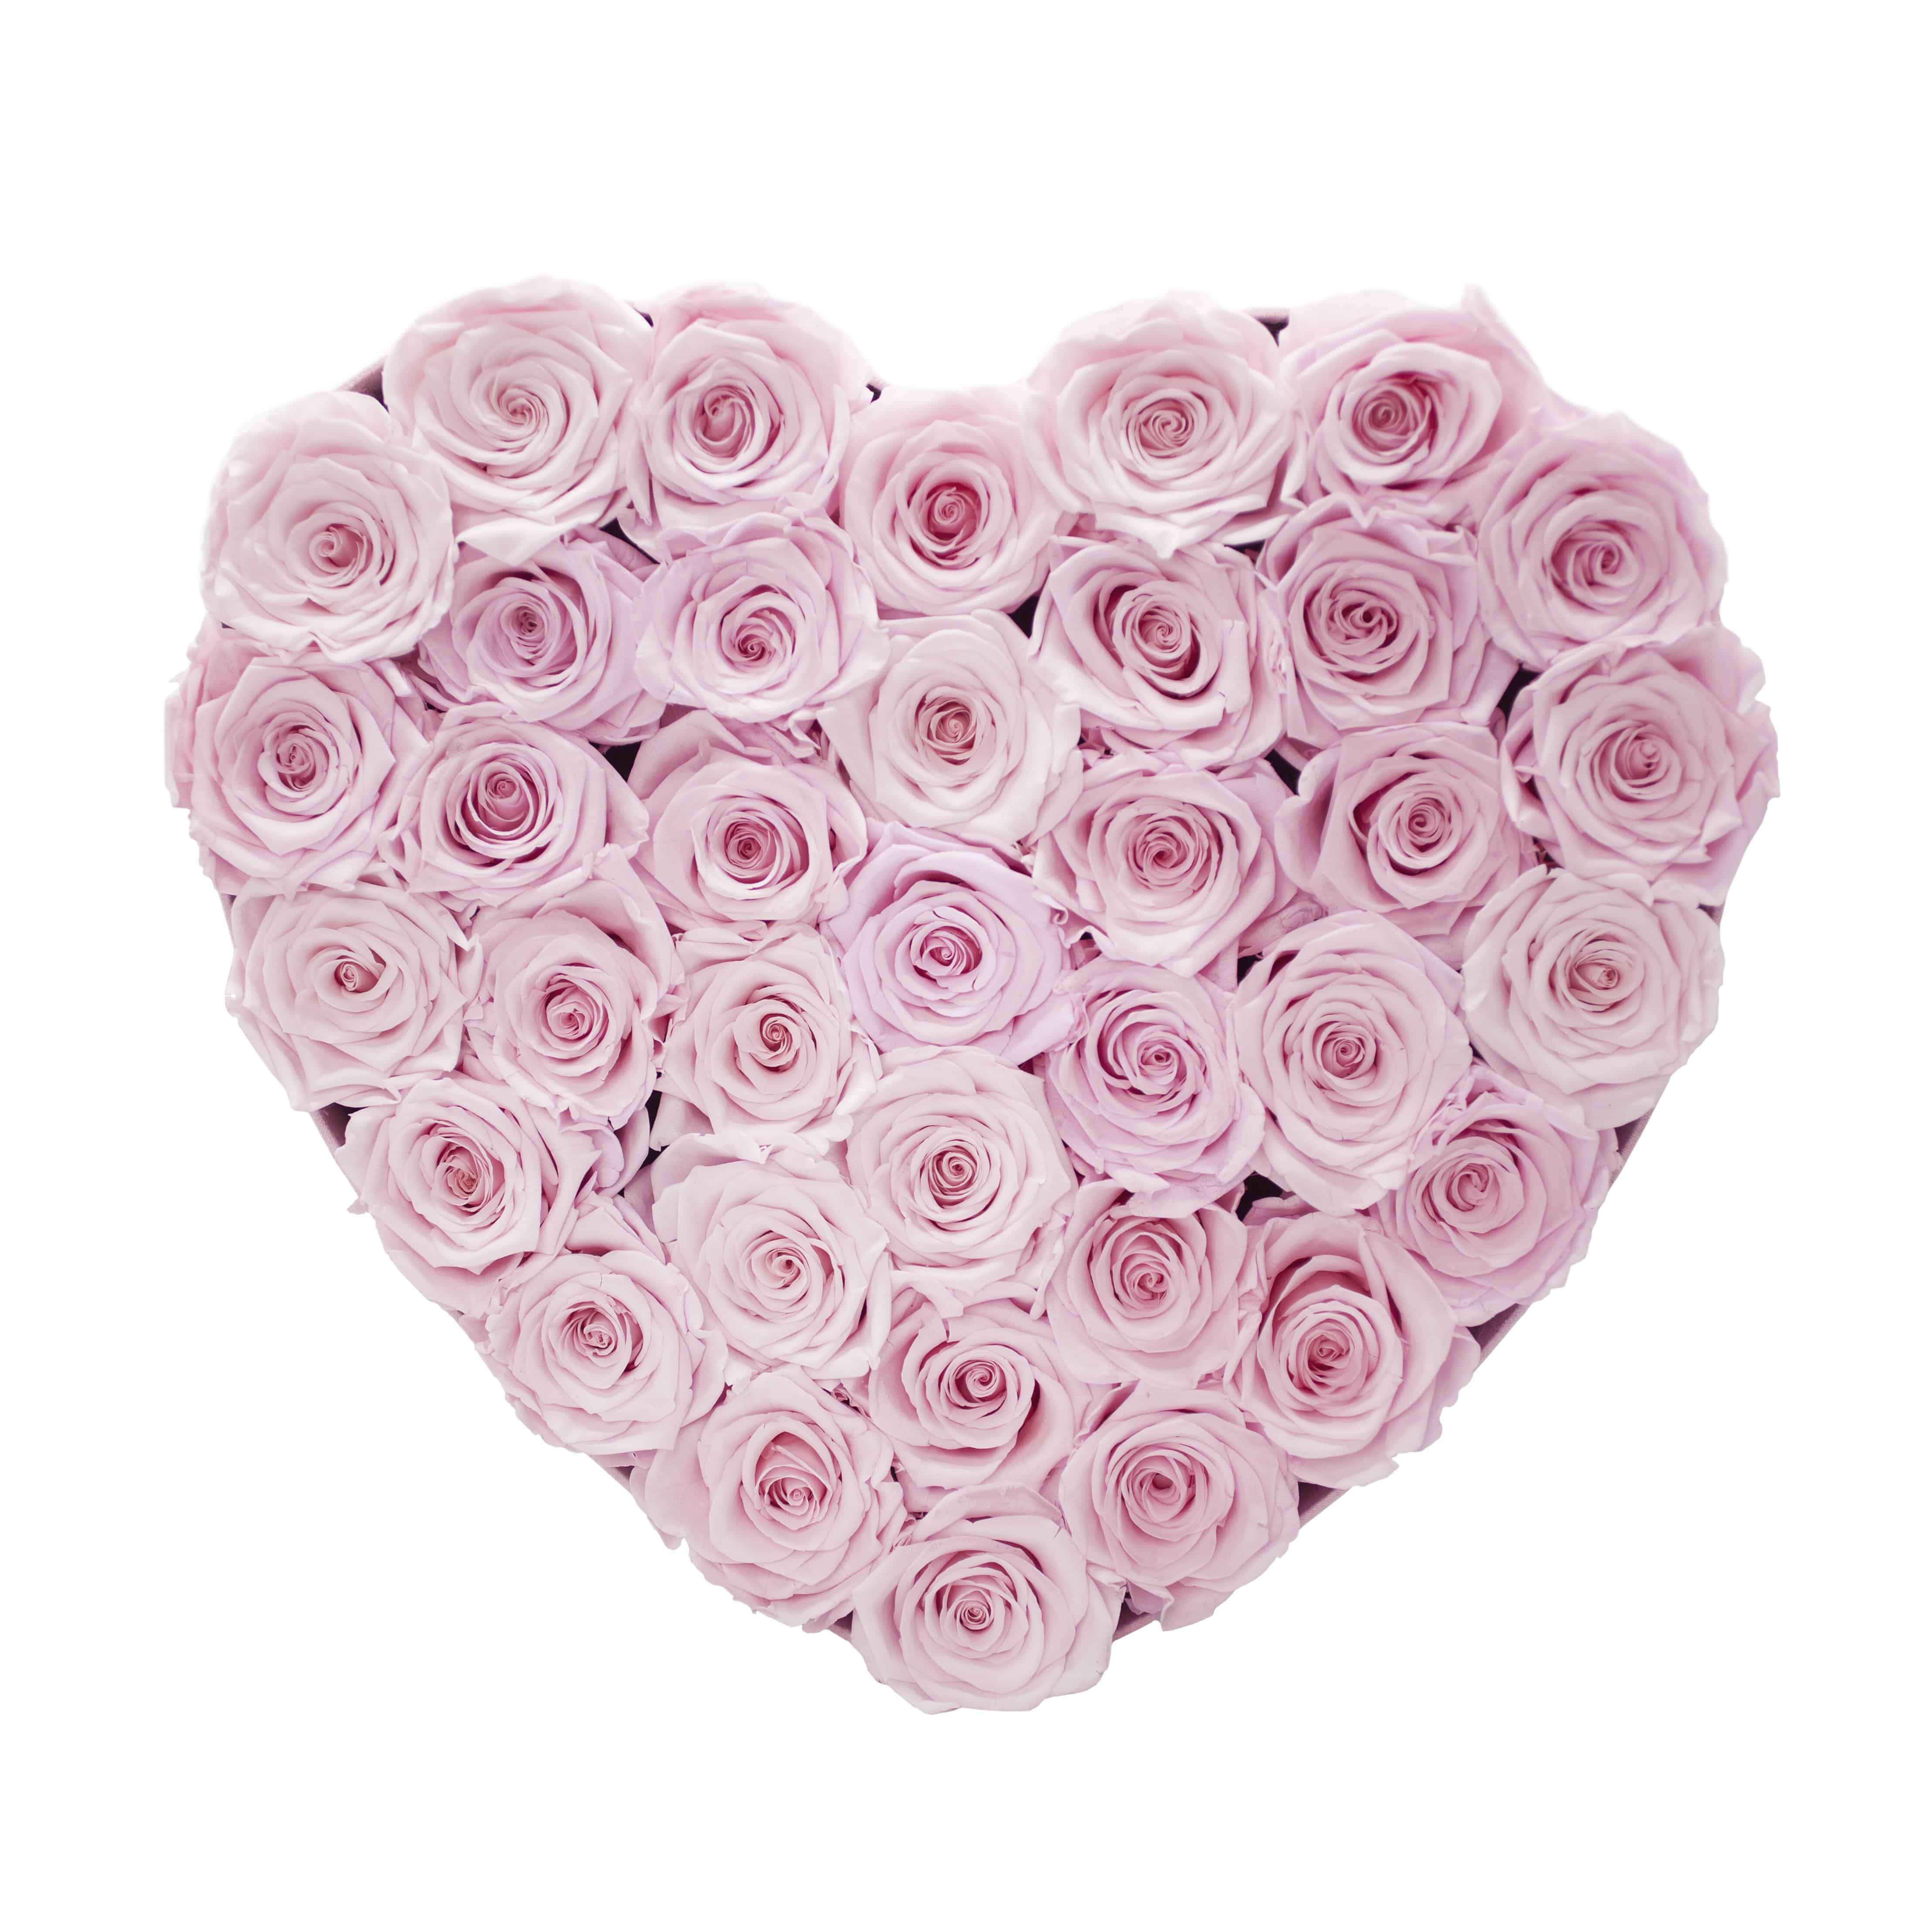 36 Soft Pink Preserved Roses in A Heart Shaped Box - Small Heart Luxury Pink Suede Box - Le Jardin Infini Roses in a Box